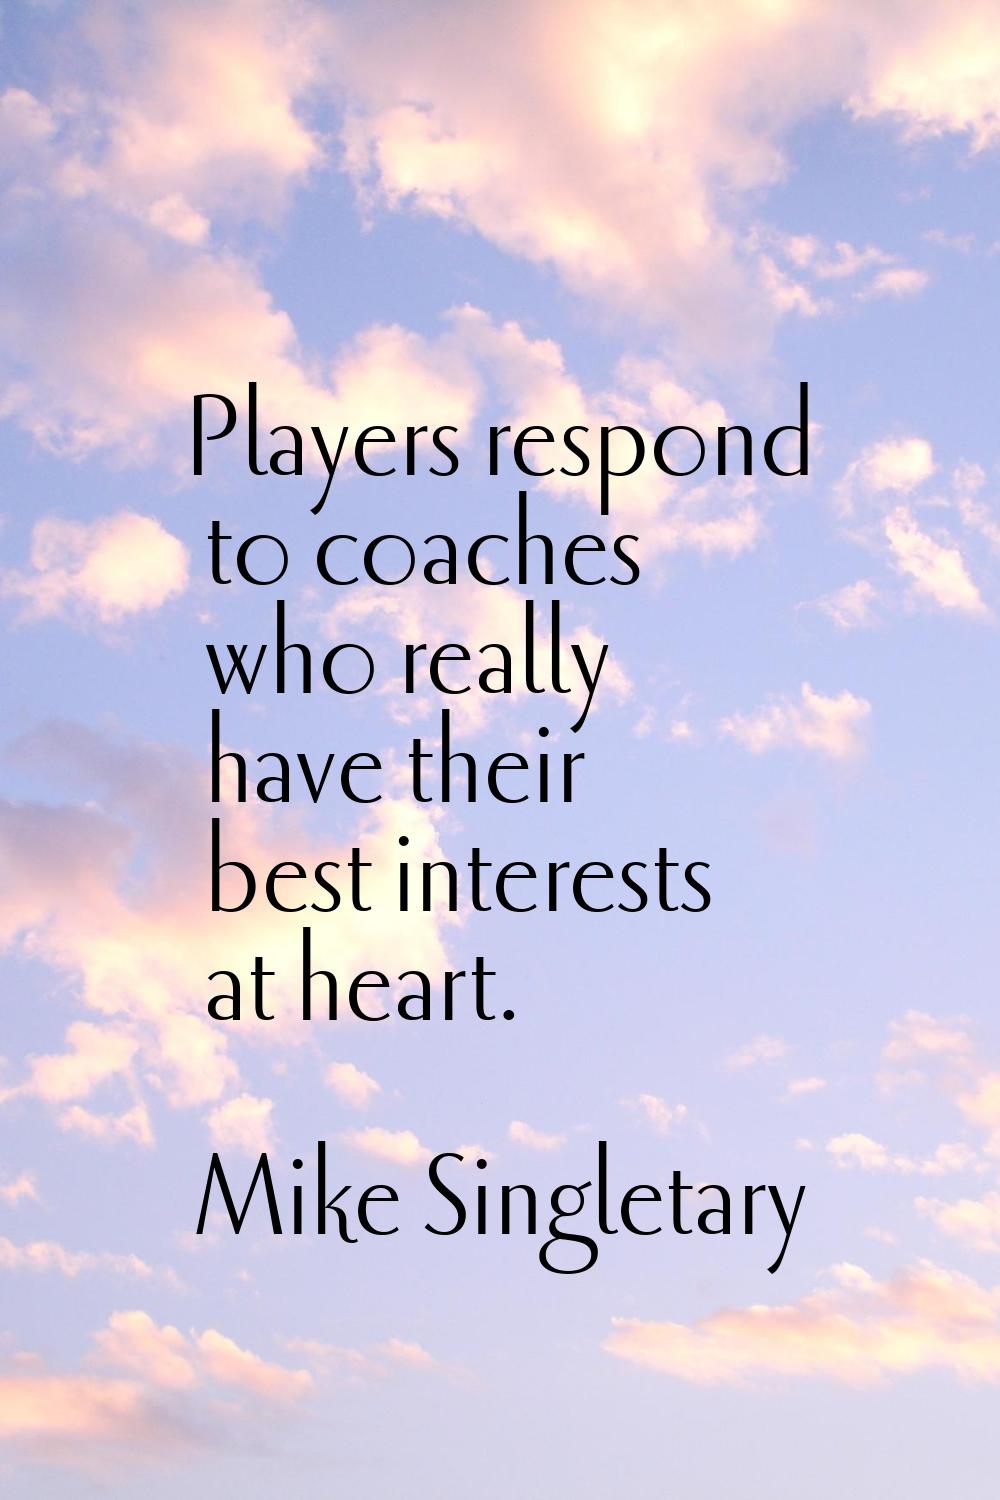 Players respond to coaches who really have their best interests at heart.